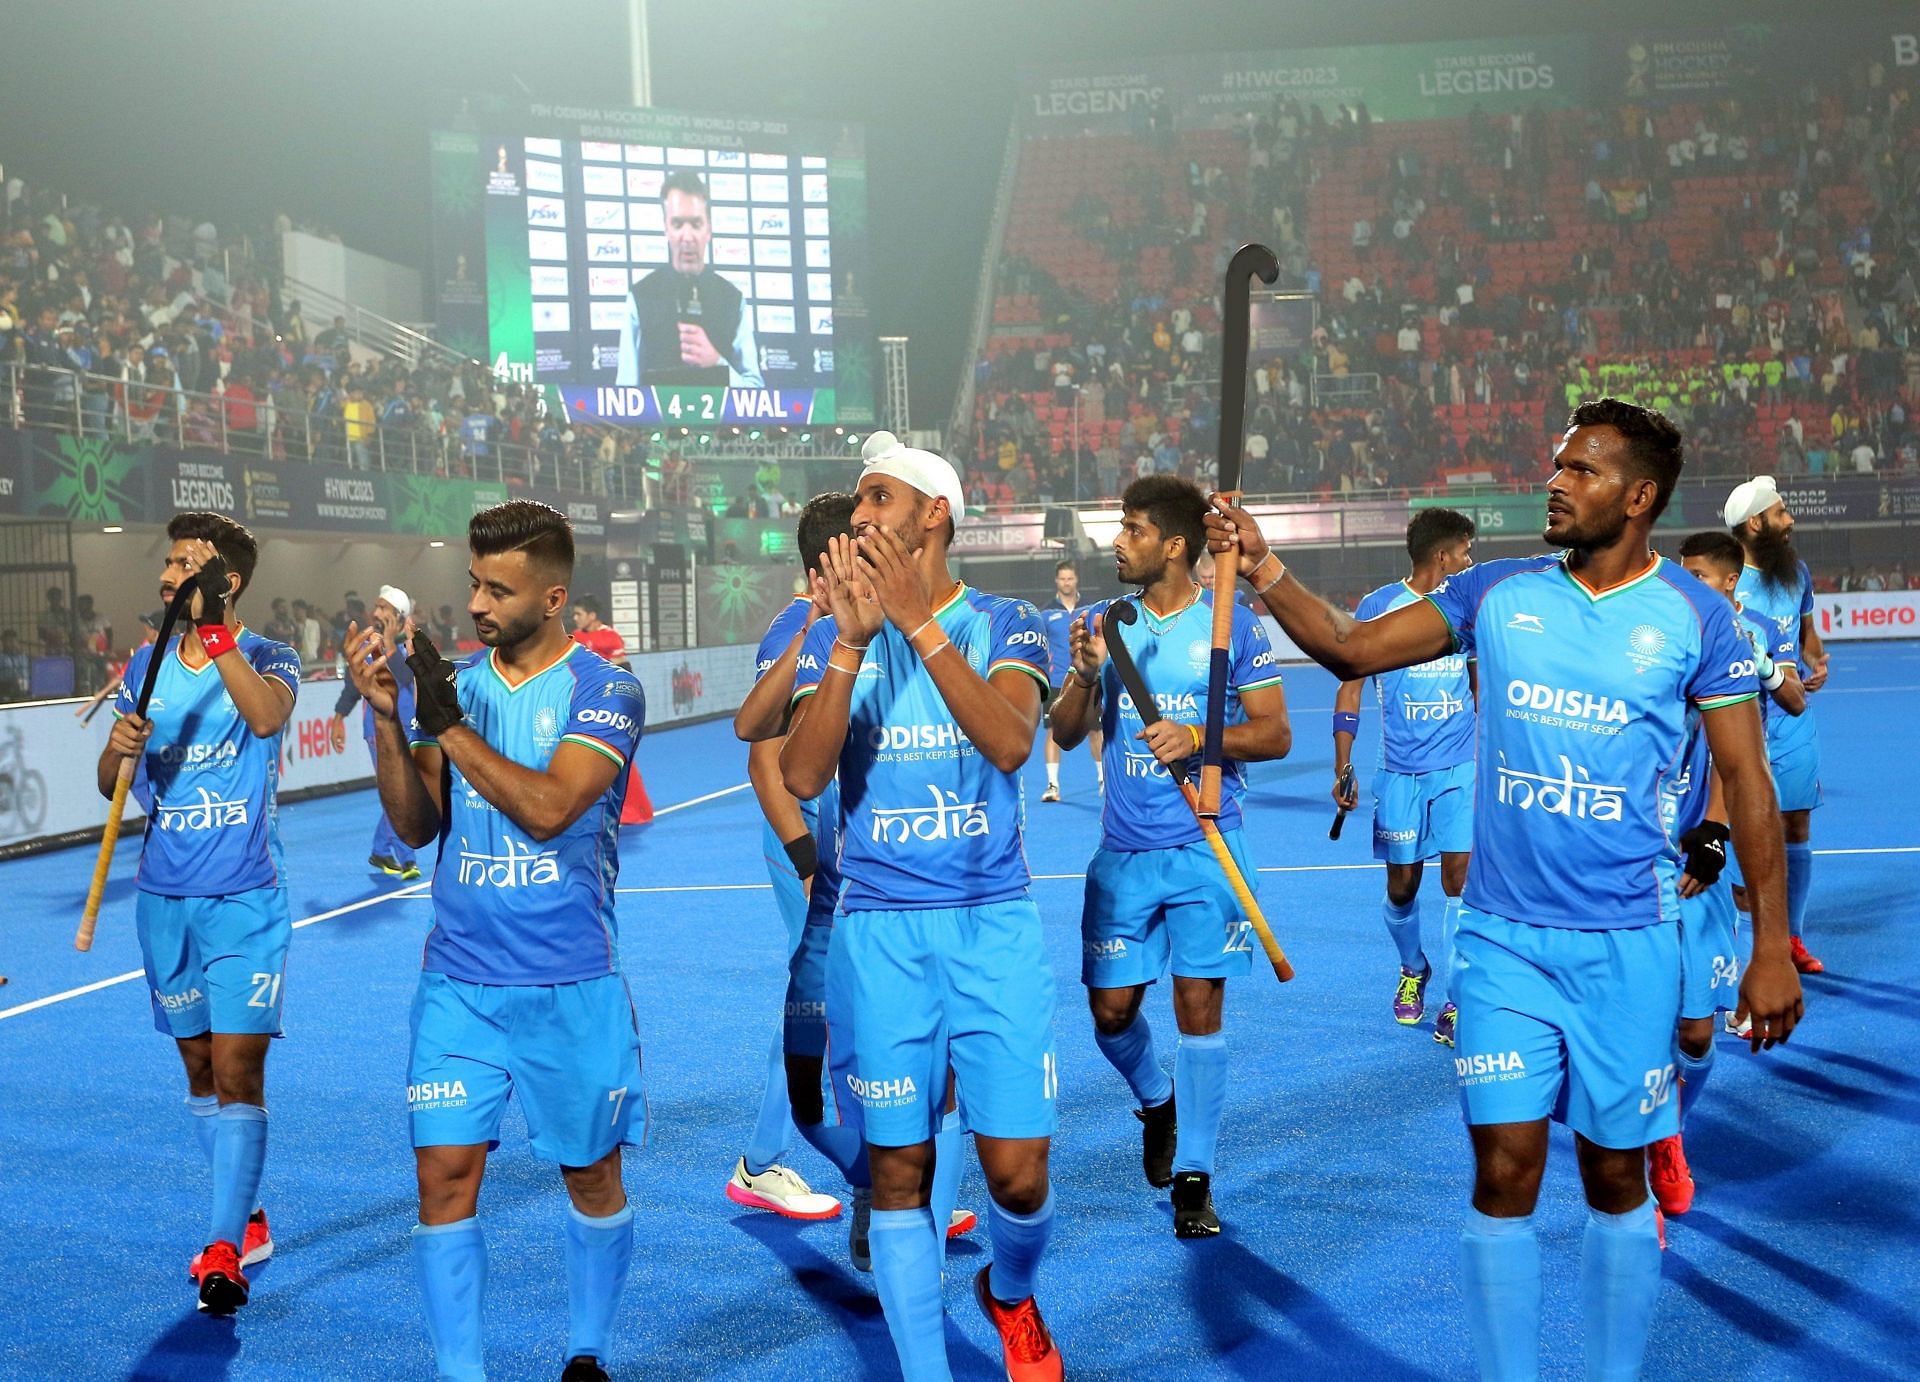 Indian team celebrating their win against Wales team in an earlier match (Image Courtesy: Twitter/Hockey India)